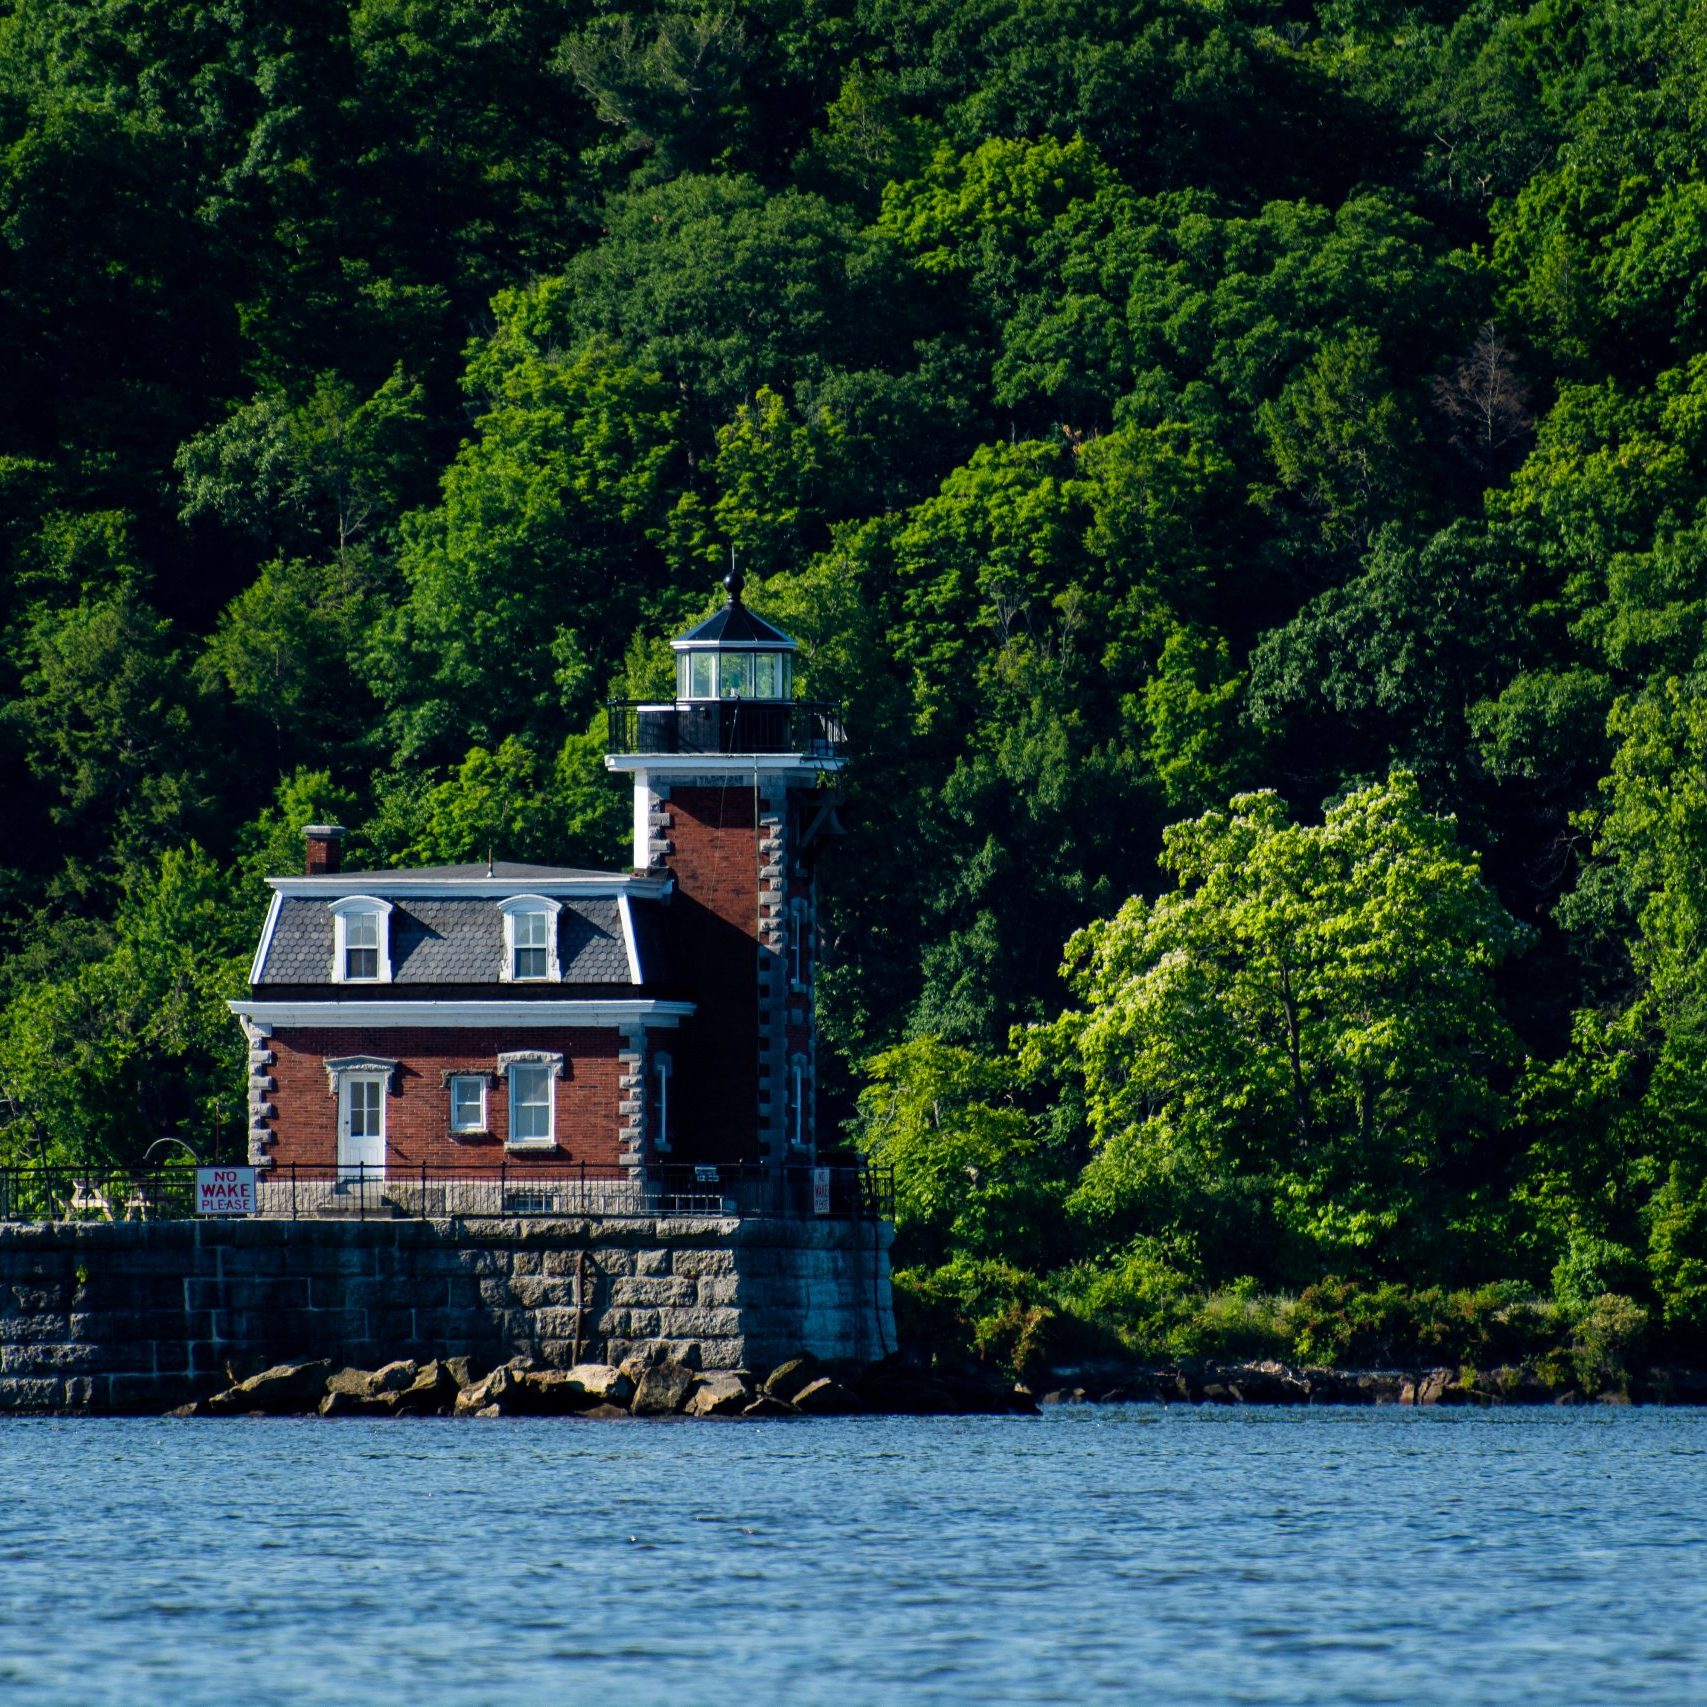 View of the Hudson Athens Lighthouse on the Hudson River